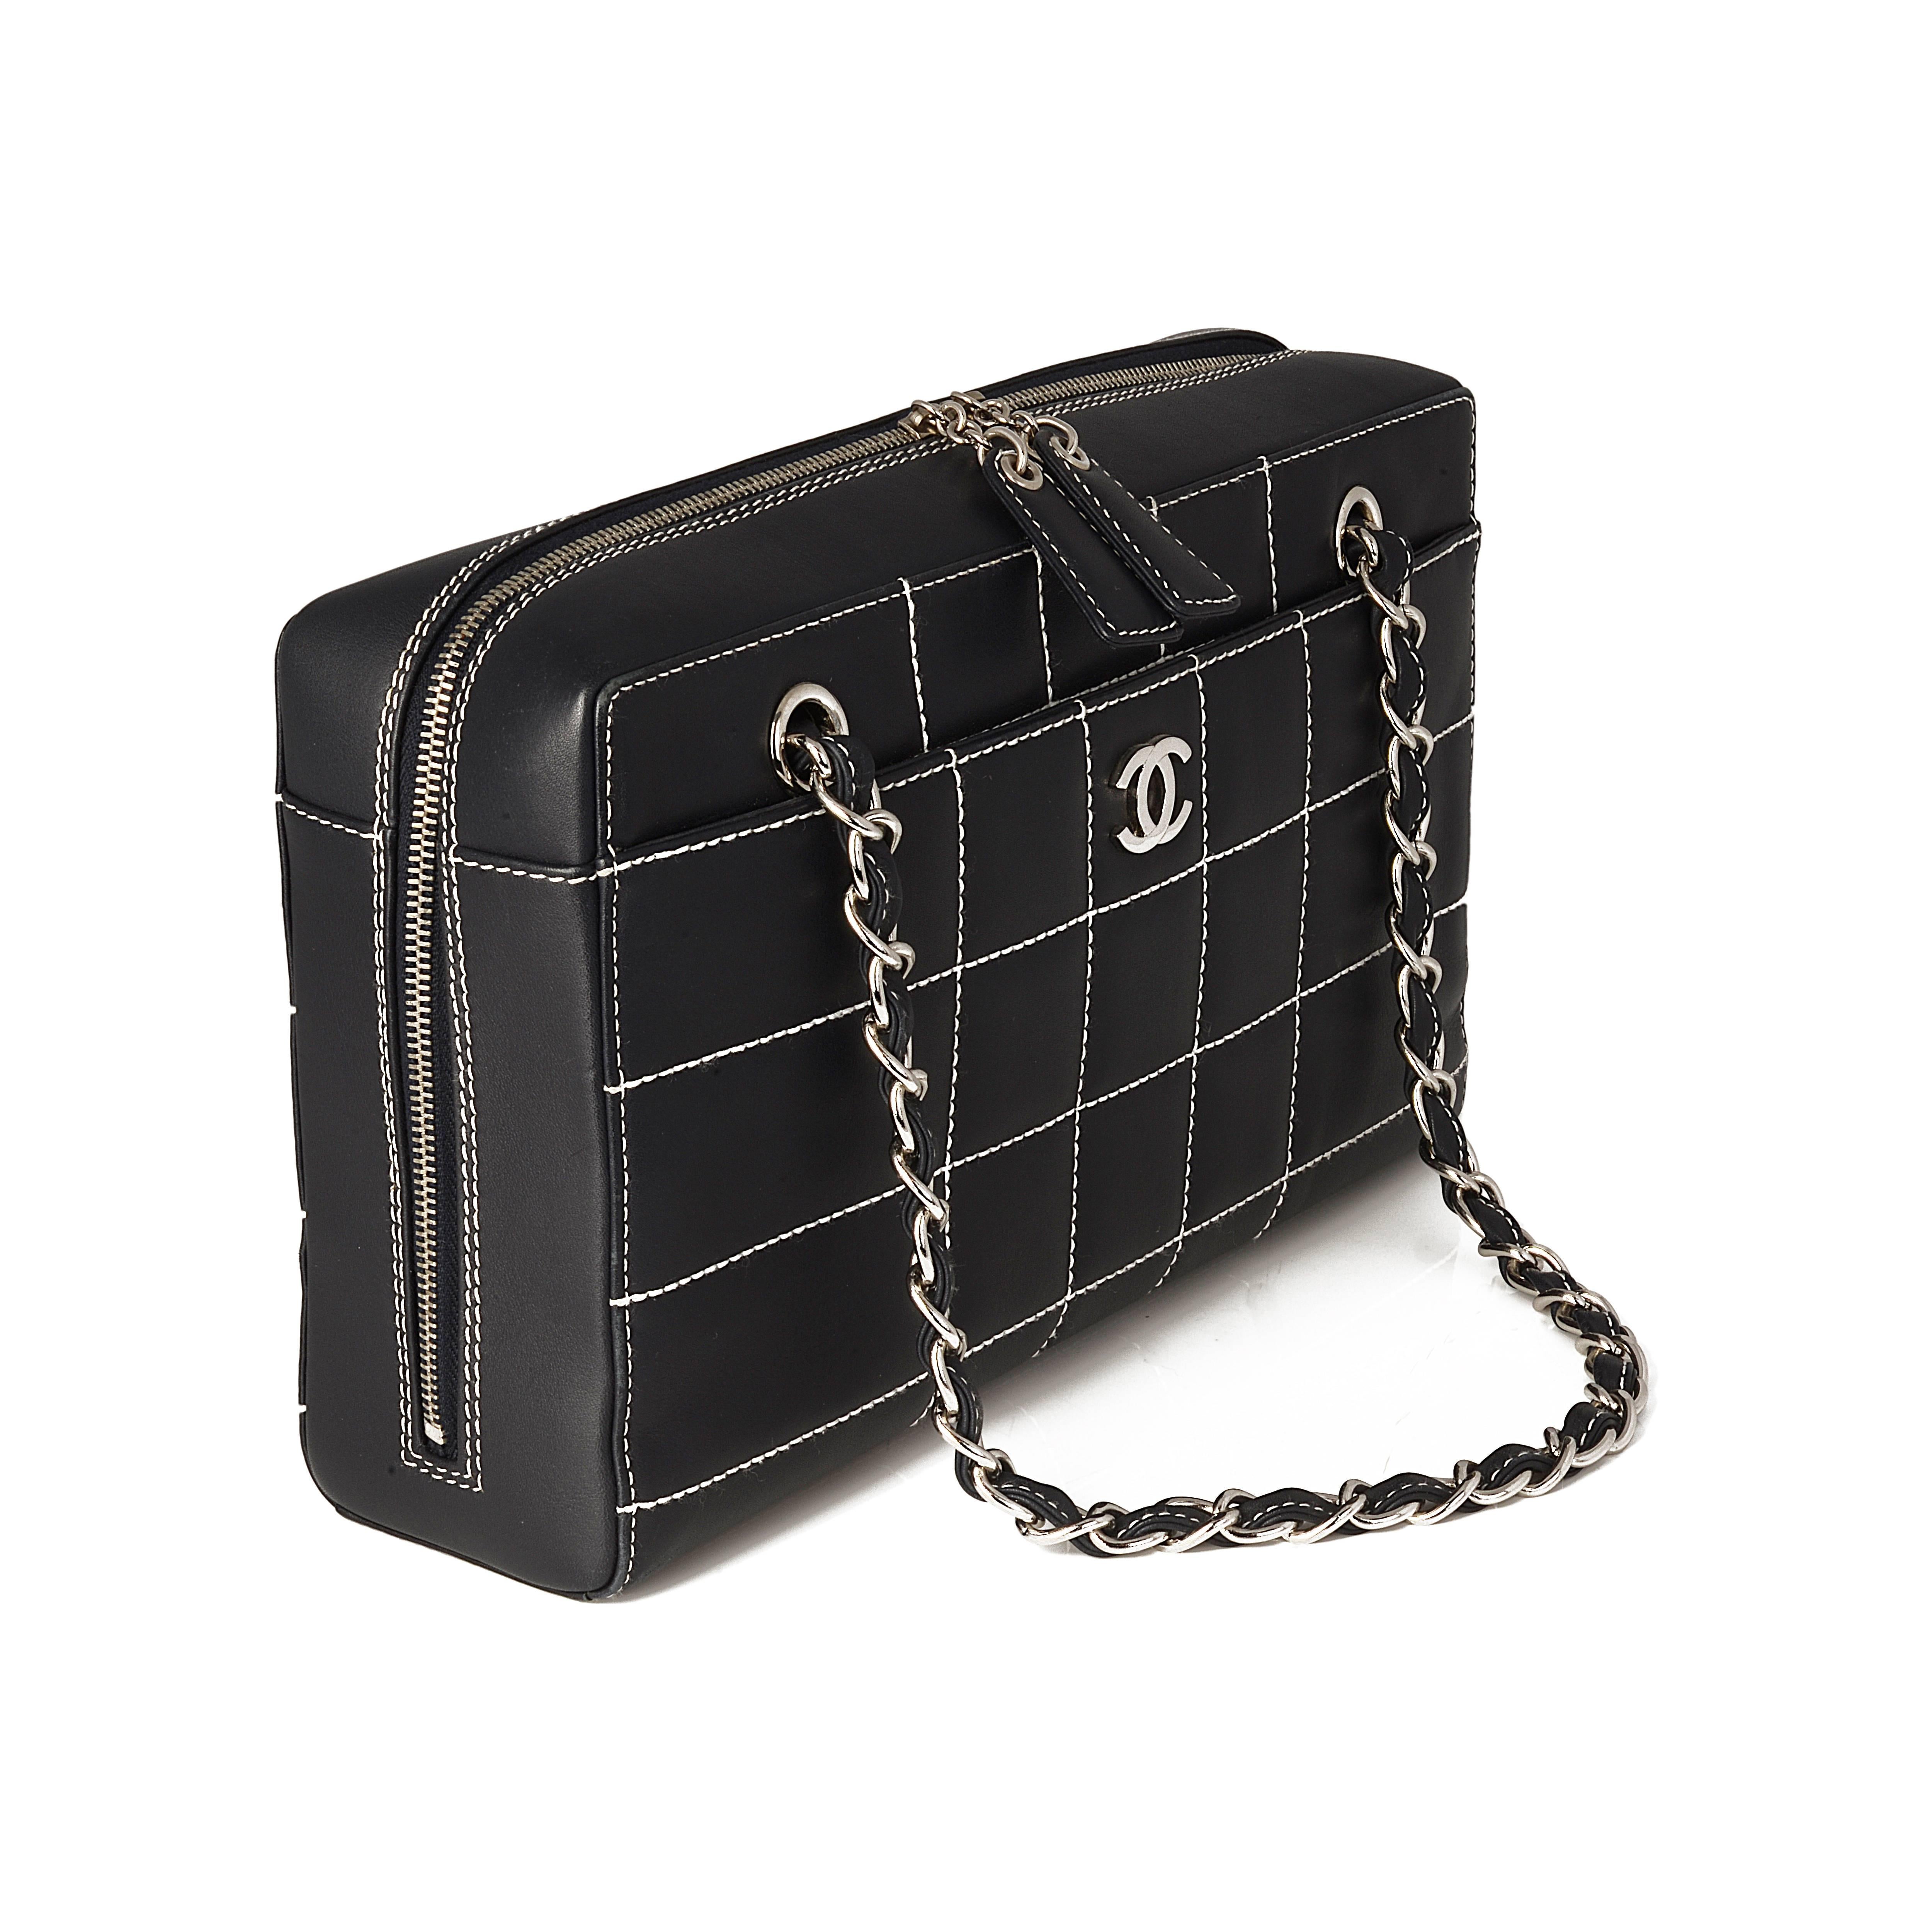 Crafted in France from navy blue leather, this unique shoulder bag features chain and leather straps, and a double zip closure. Inside there is a spacious main compartment and an internal zipped pocket for all your daily essentials. The exterior is